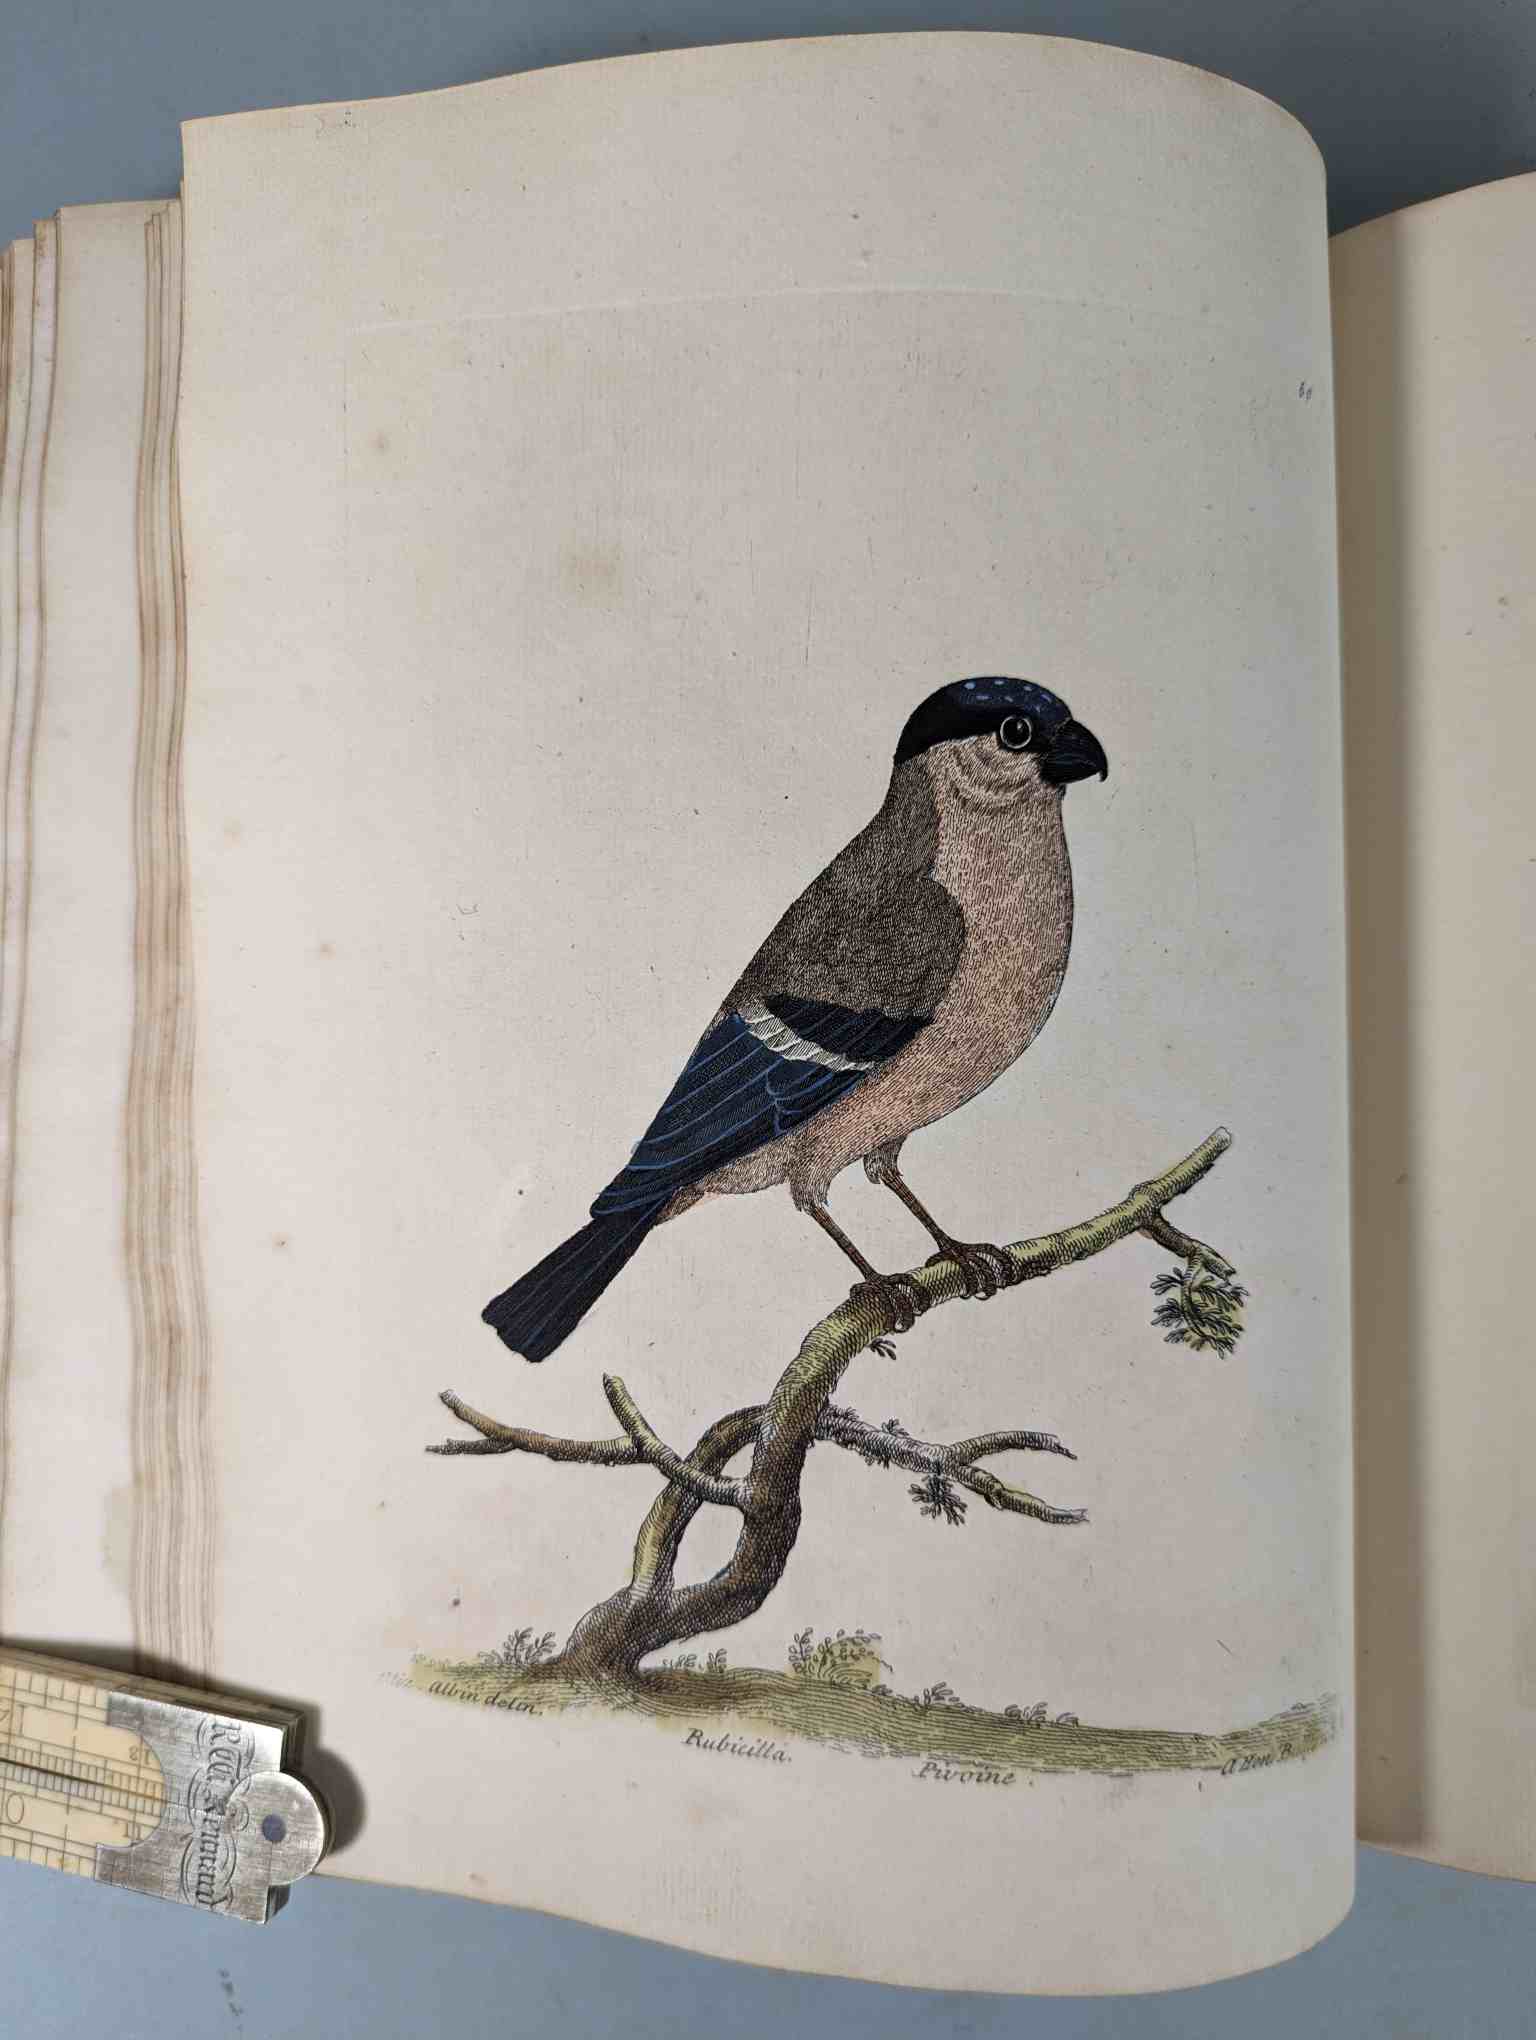 ALBIN, Eleazar. A Natural History of Birds, to which are added, Notes and Observations by W. - Image 62 of 208